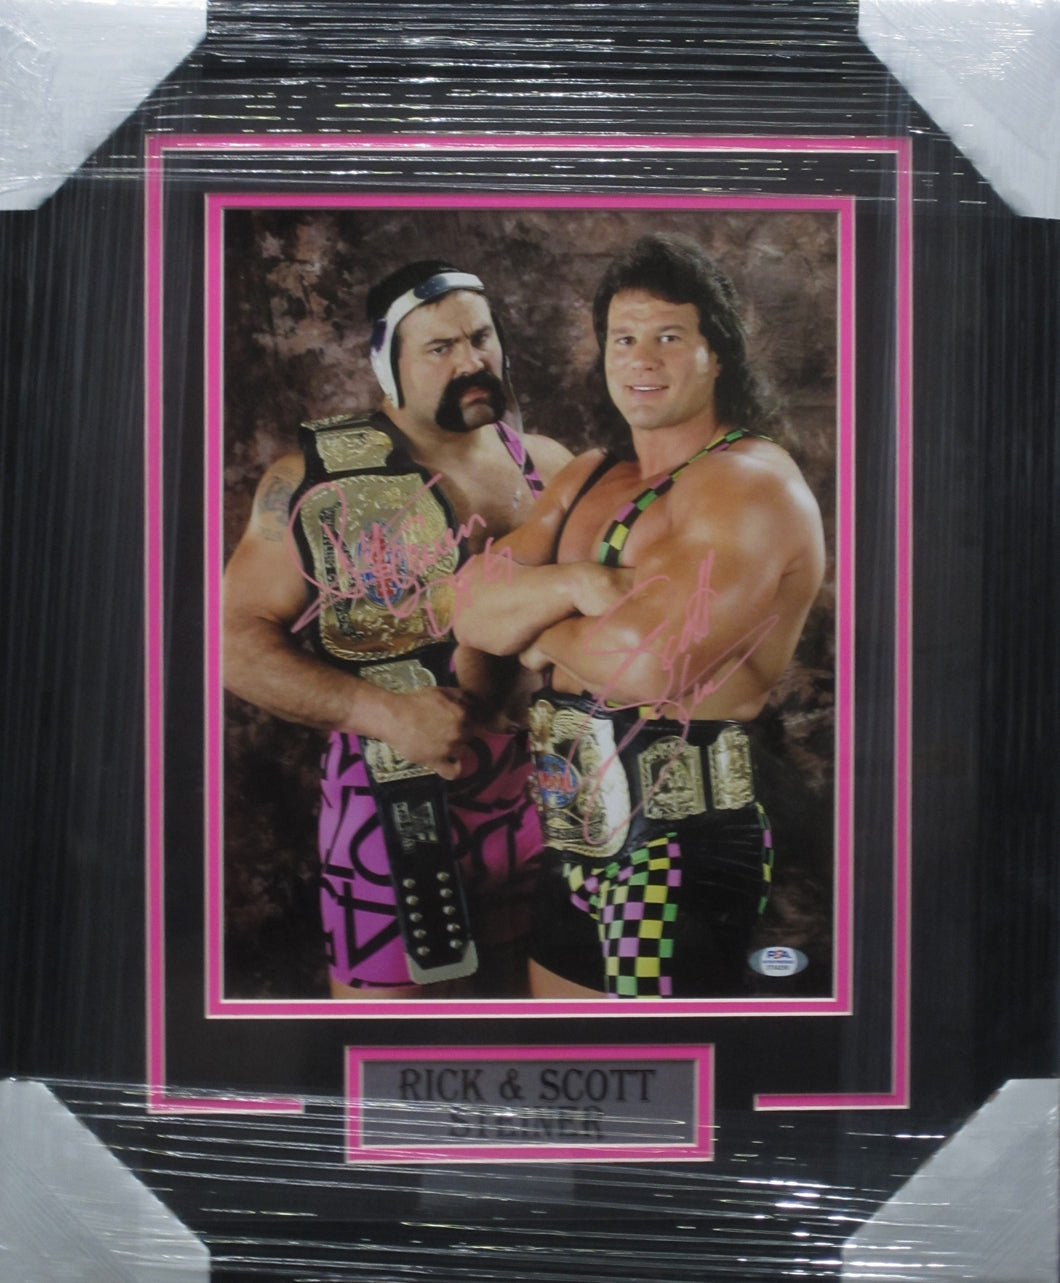 American Wrestling Tag Team Steiner Brothers Dual Signed 11x14 Photo Framed & Matted with PSA COA